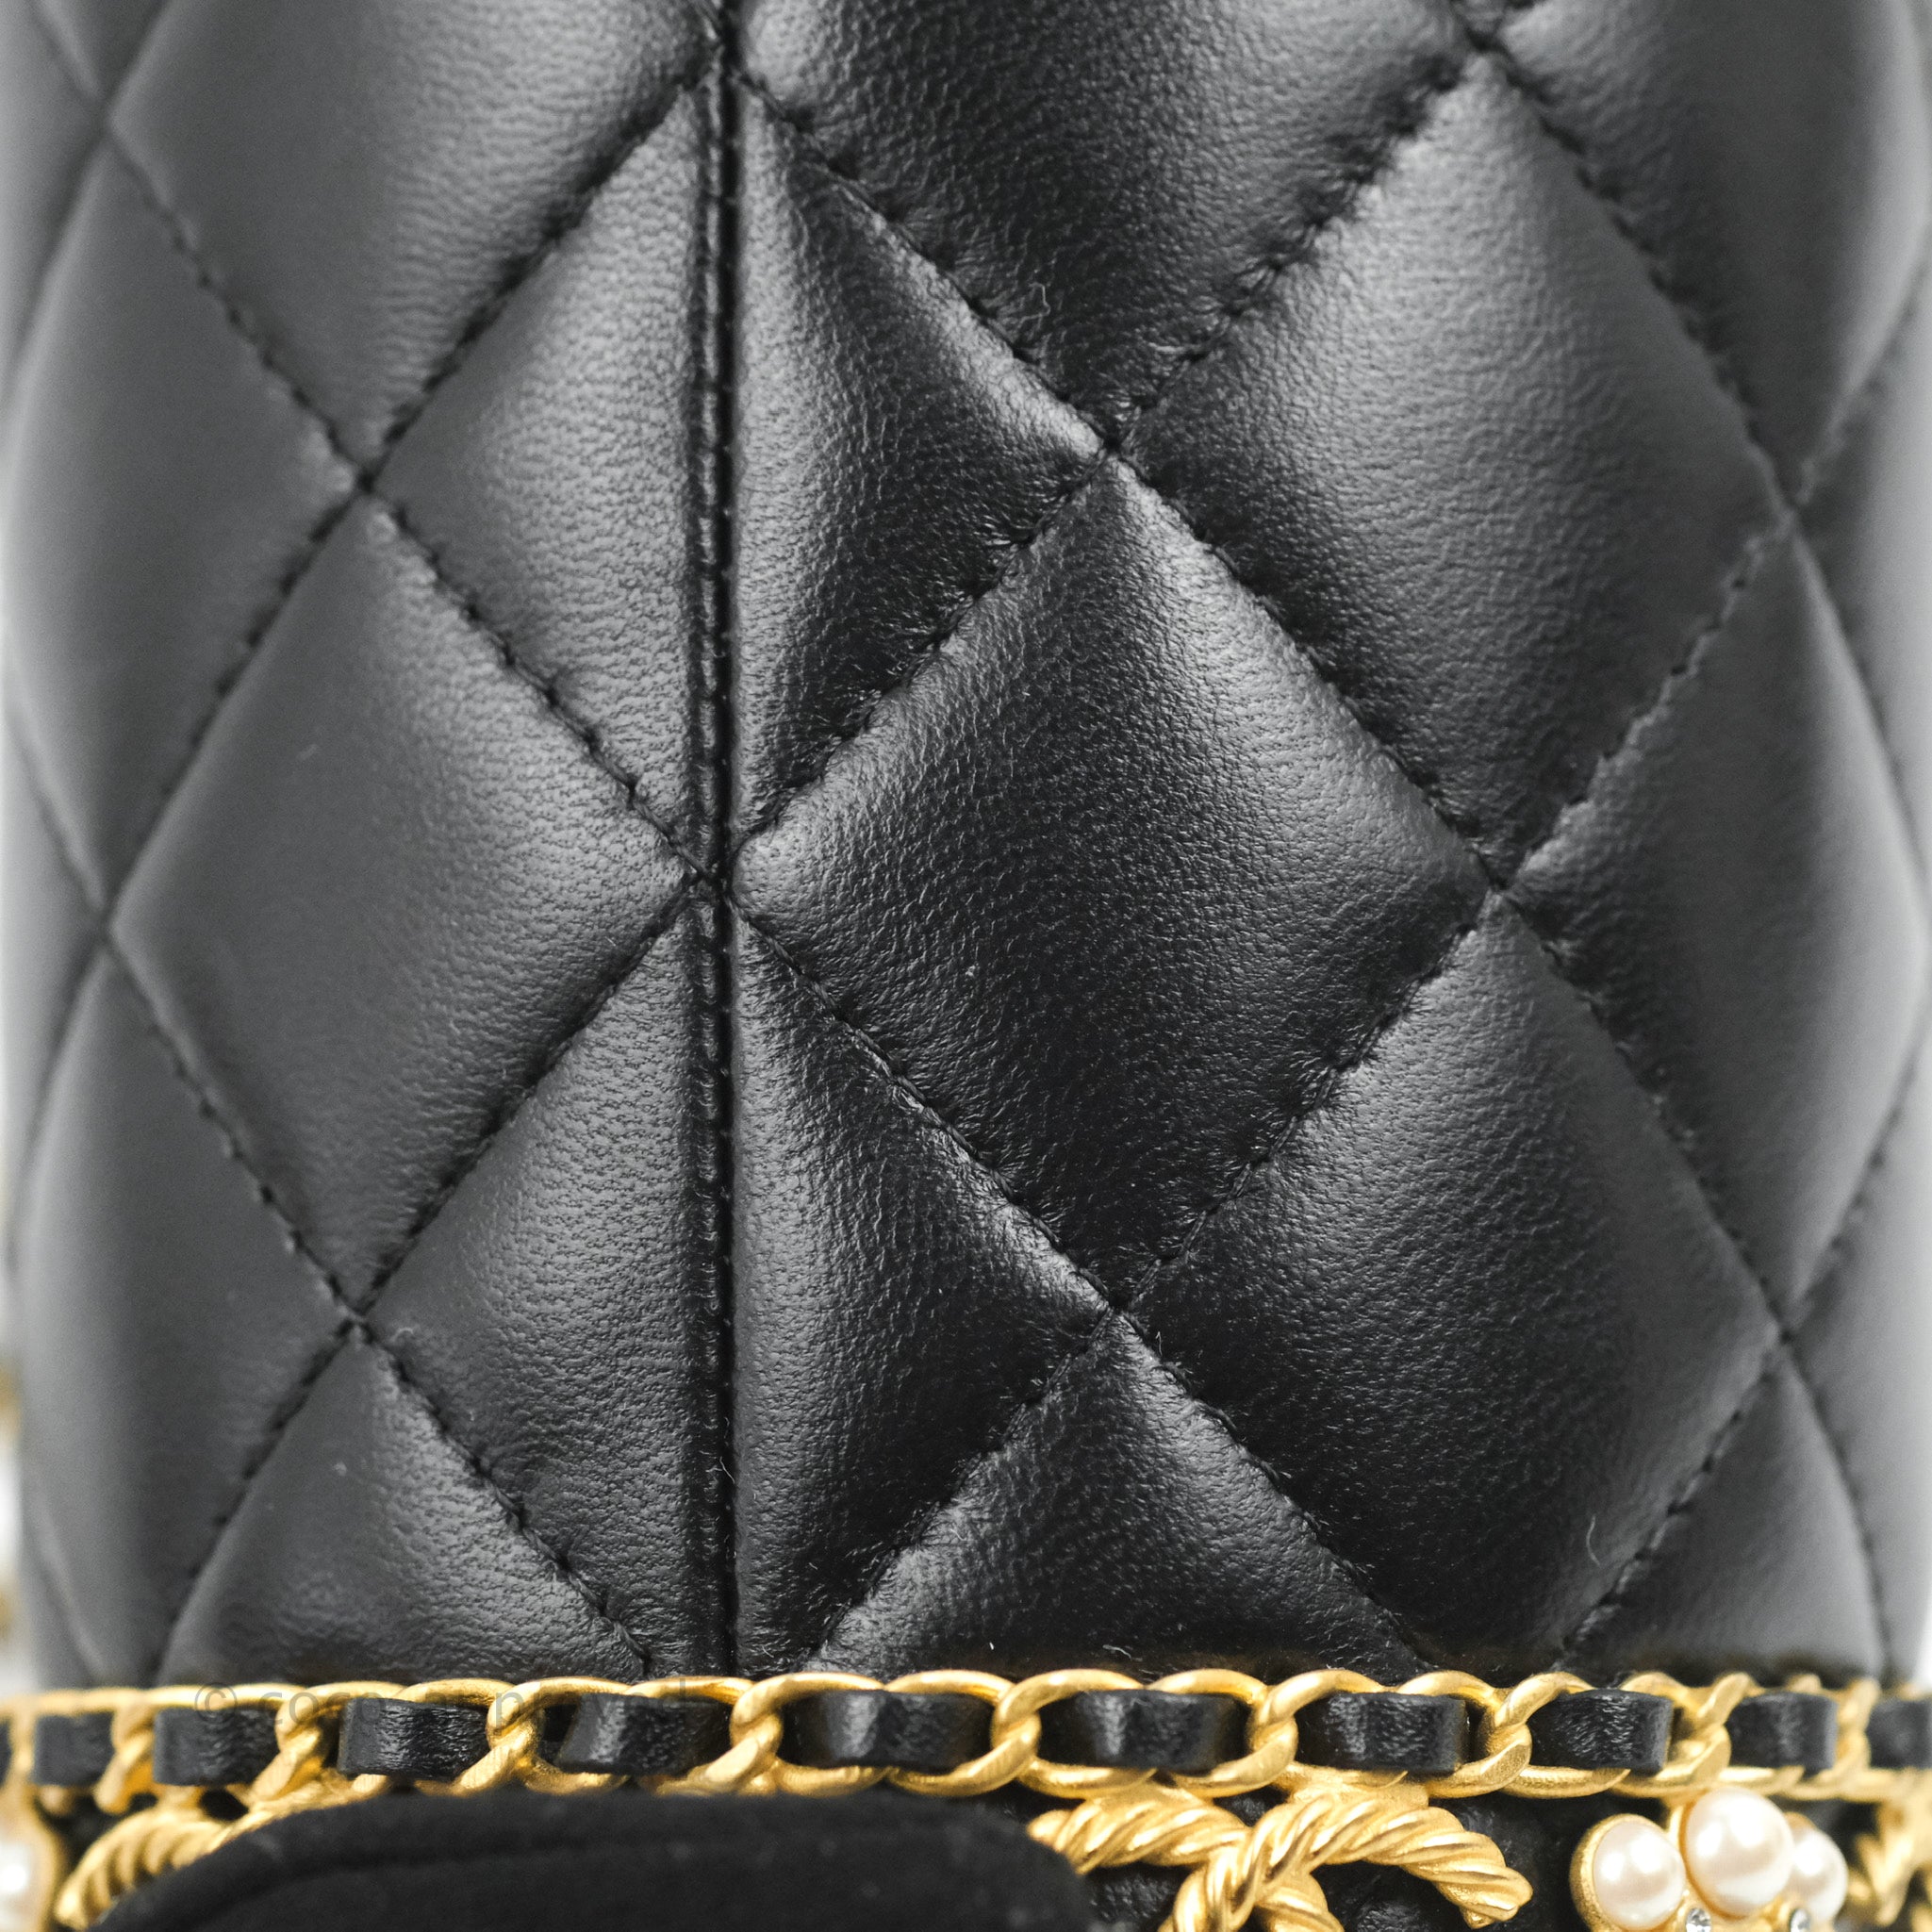 Chanel Quilted Drawstring Pearl Flower Bucket Bag Black Lambskin Aged – Coco  Approved Studio